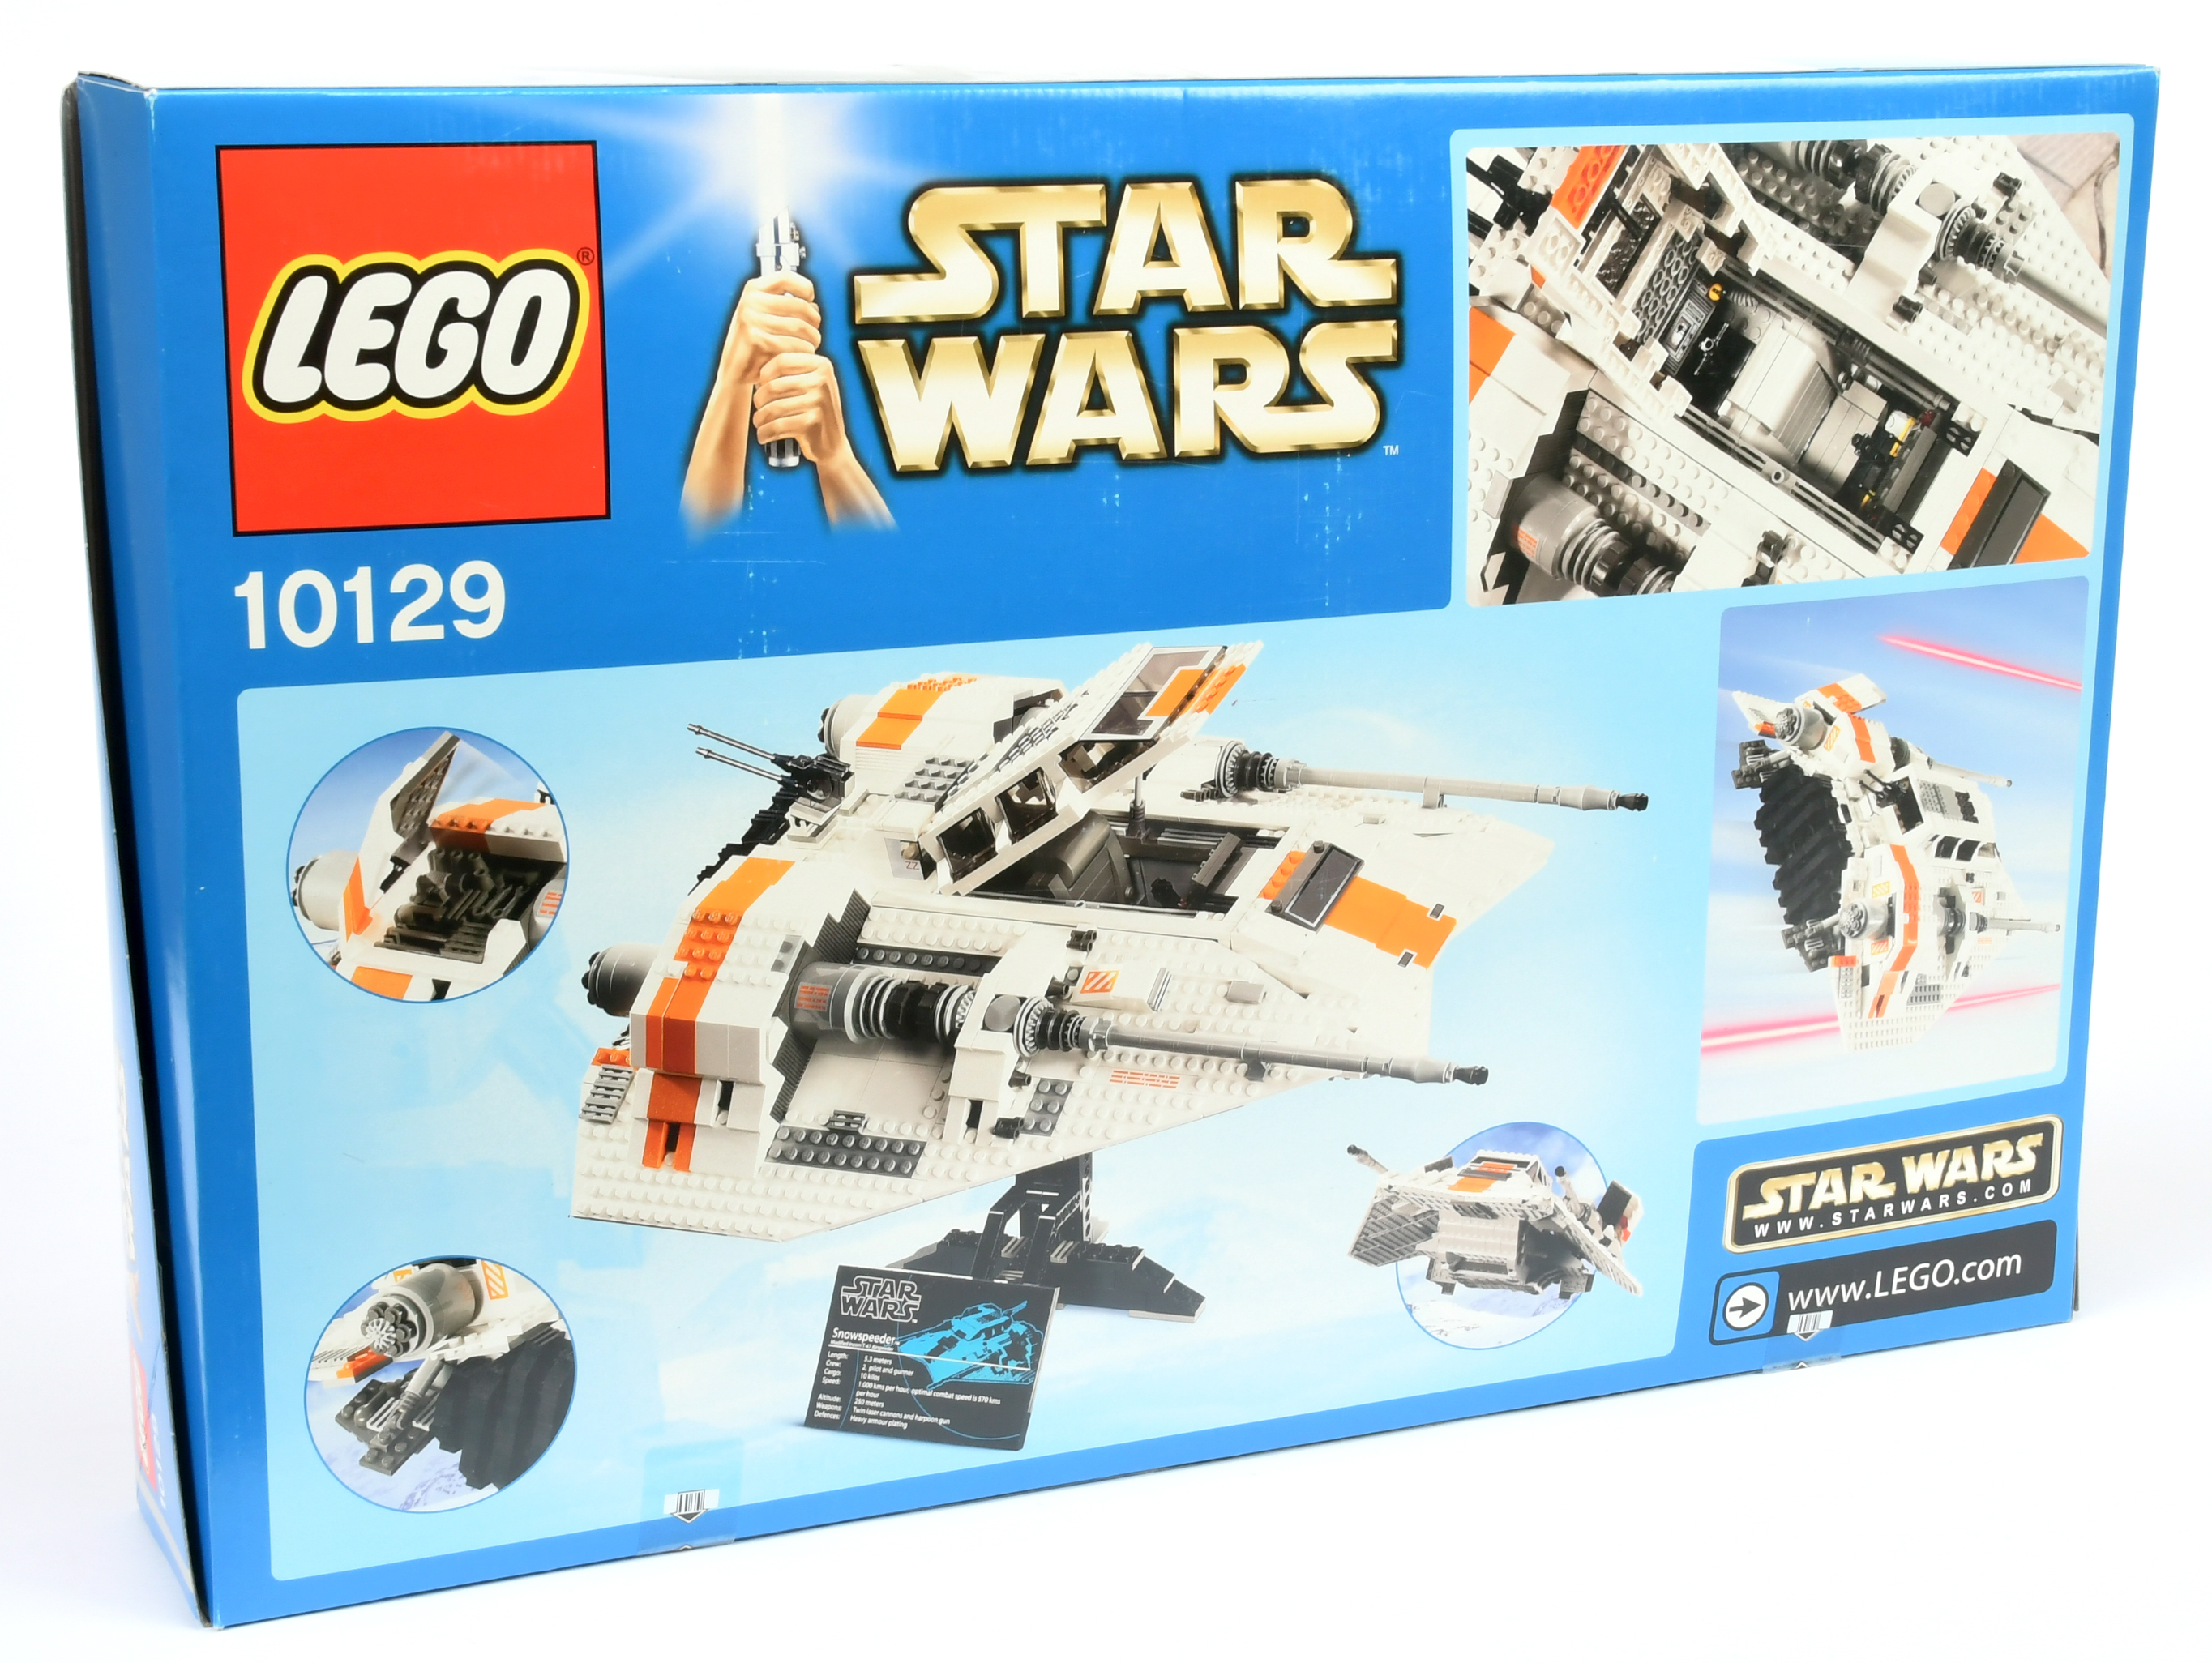 Lego 10129 Rebel Snowspeeder - Blue Box issue from 2004, within Excellent Plus sealed packaging. ... - Image 2 of 2